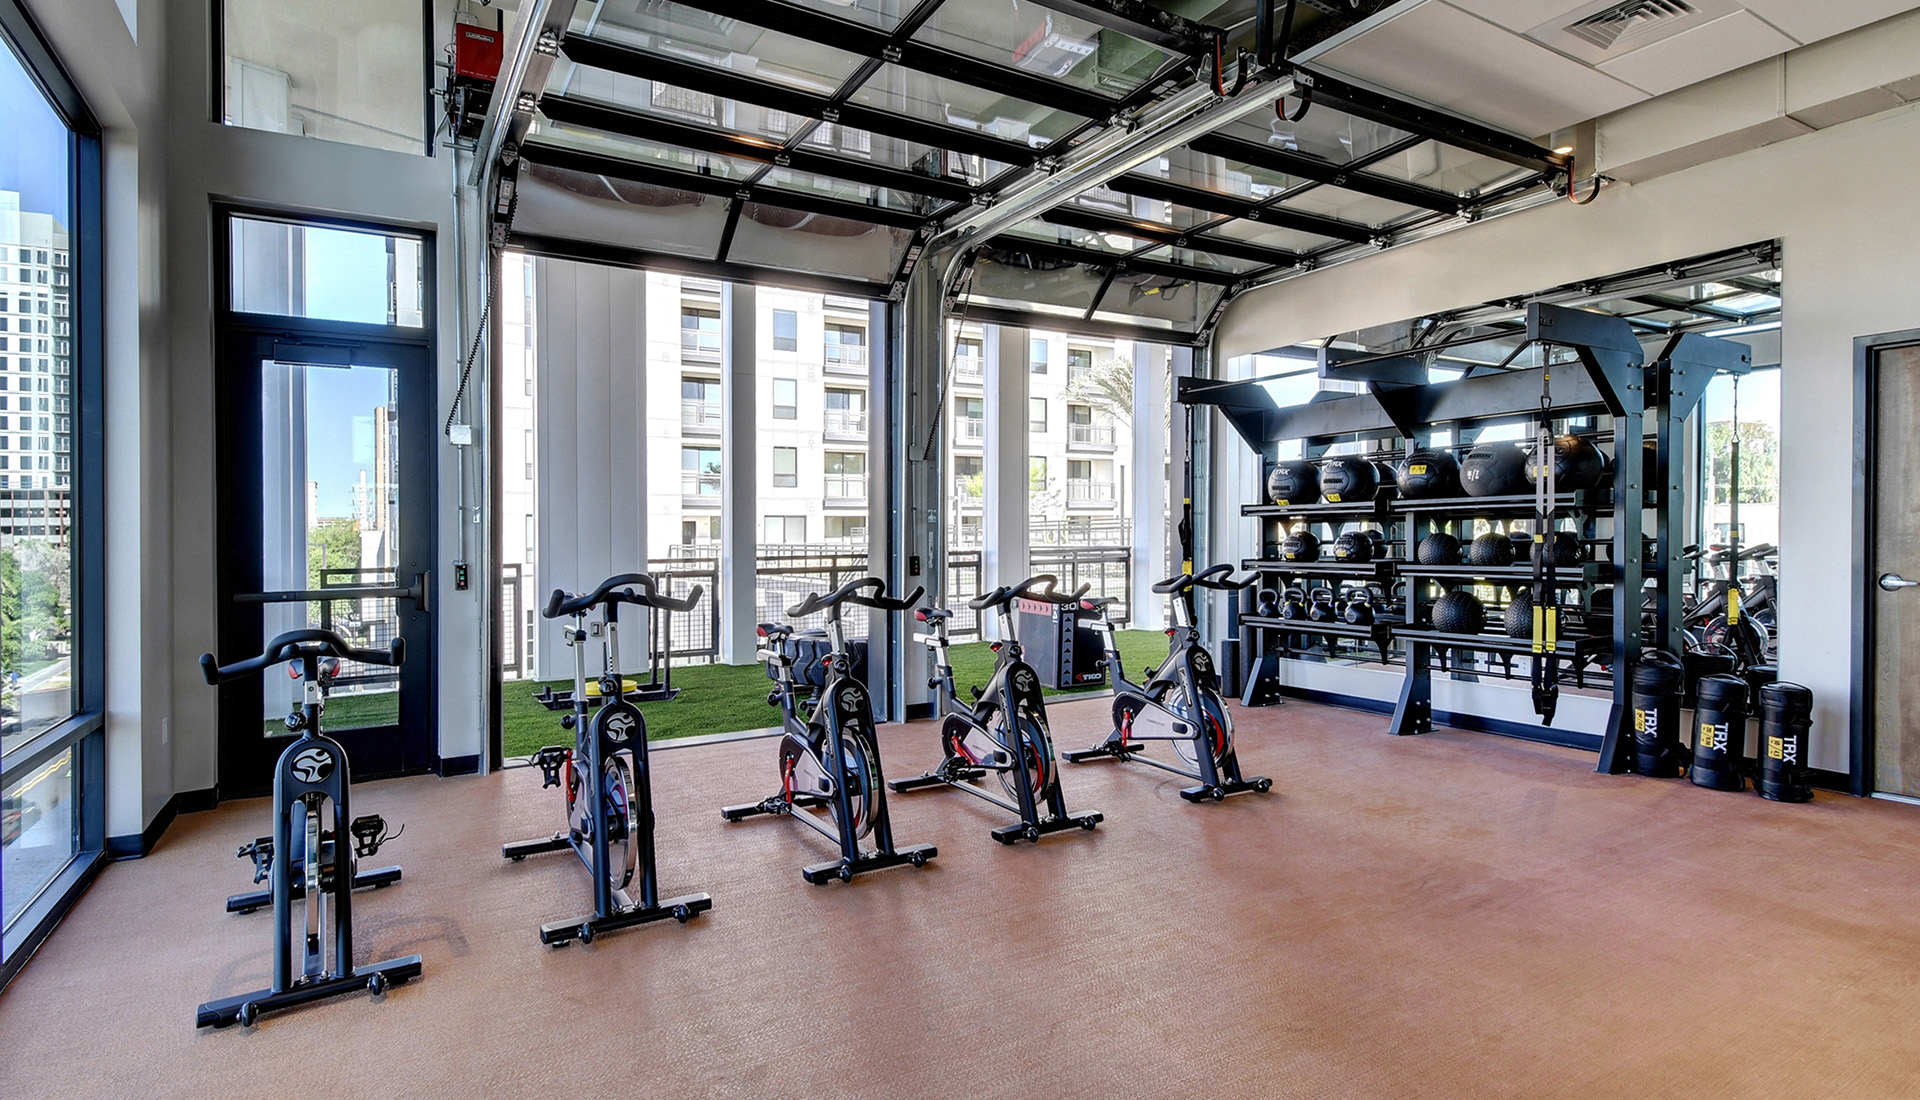 Spin studio with spin bikes, trx equipment, and access to outdoor workout area